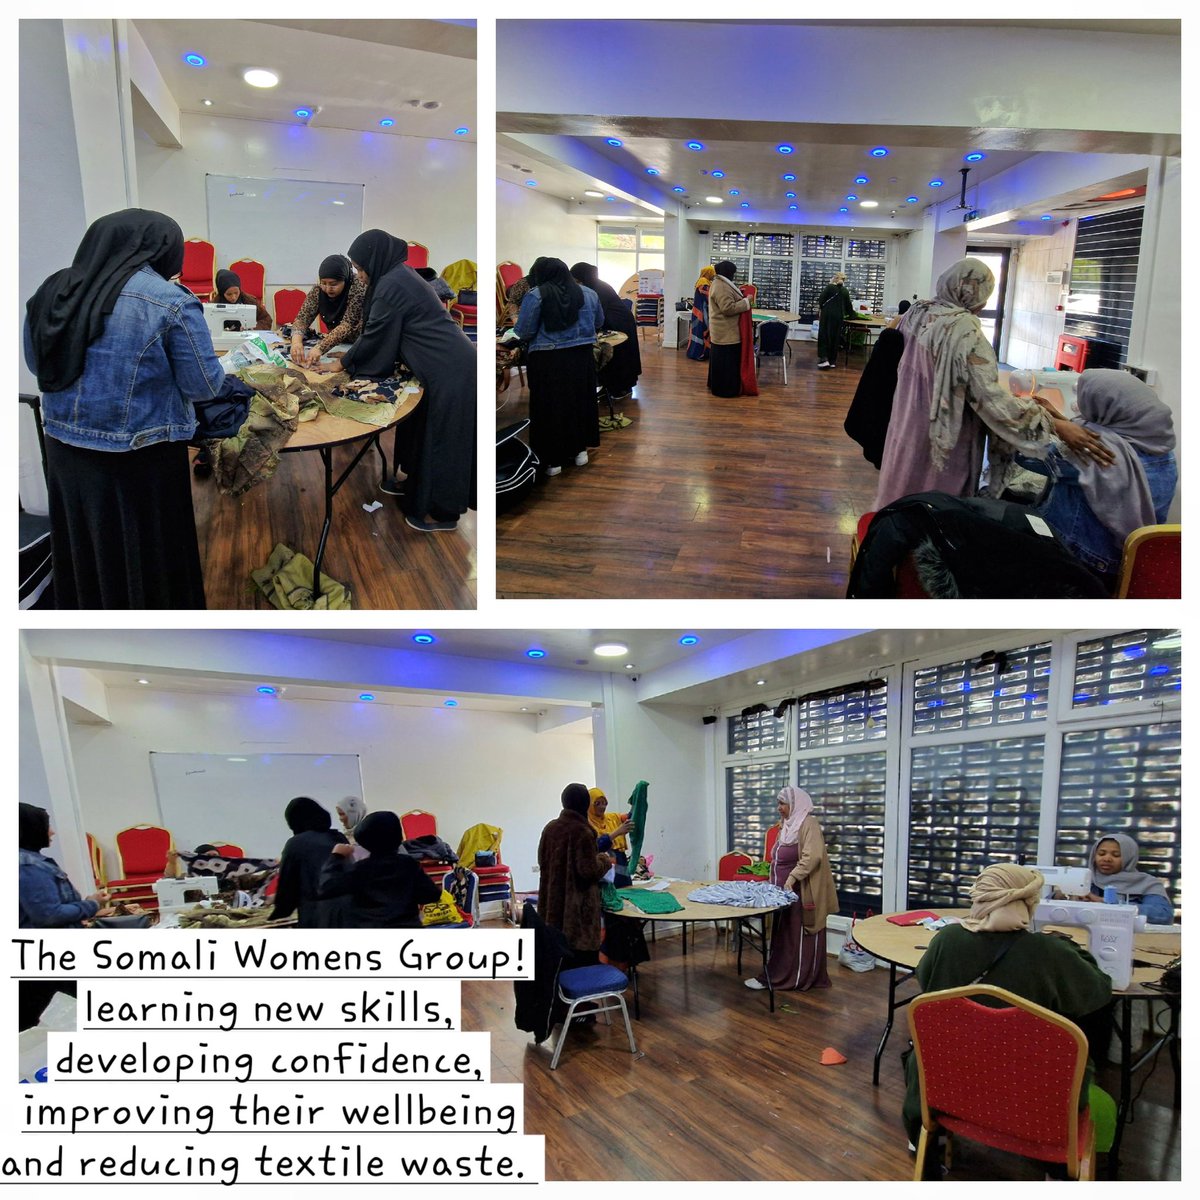 Today at Connecting Steps with the Somali Women's Group! The ladies have shown great teamwork in refashioning their old clothes, bedsheets, curtains, and duvet cover into trousers & tops #skills #wellbeing #reuse #refashion #climateaction #teamwork #SustainableFashion #sewing